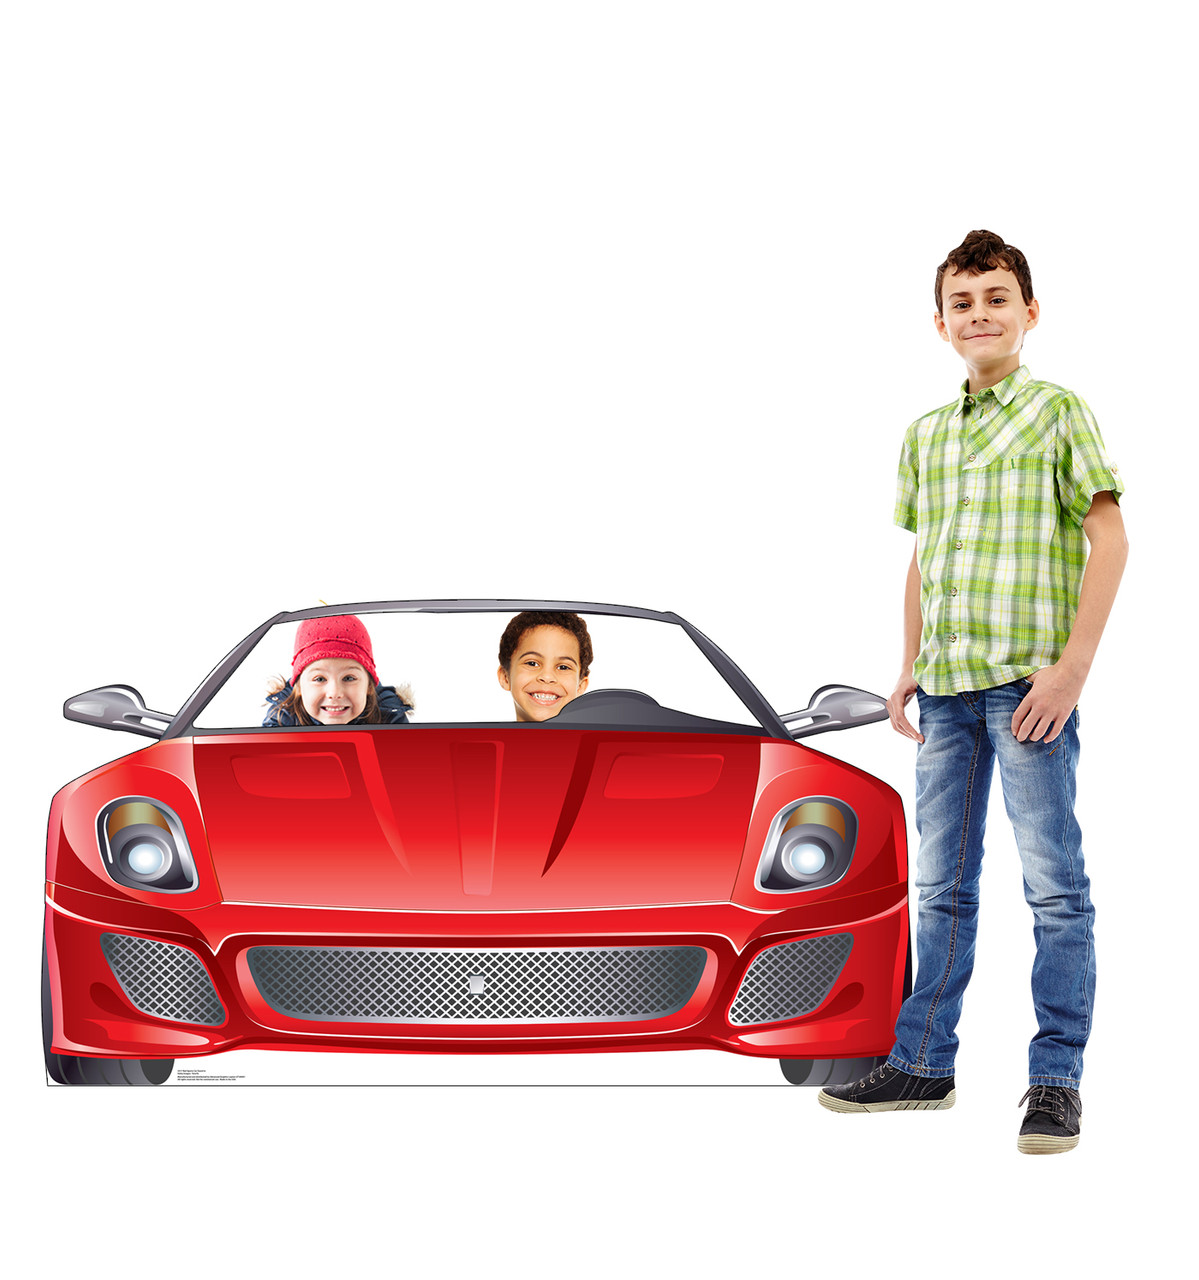 Life-size cardboard standee of a Red Sports Car Standin with models.